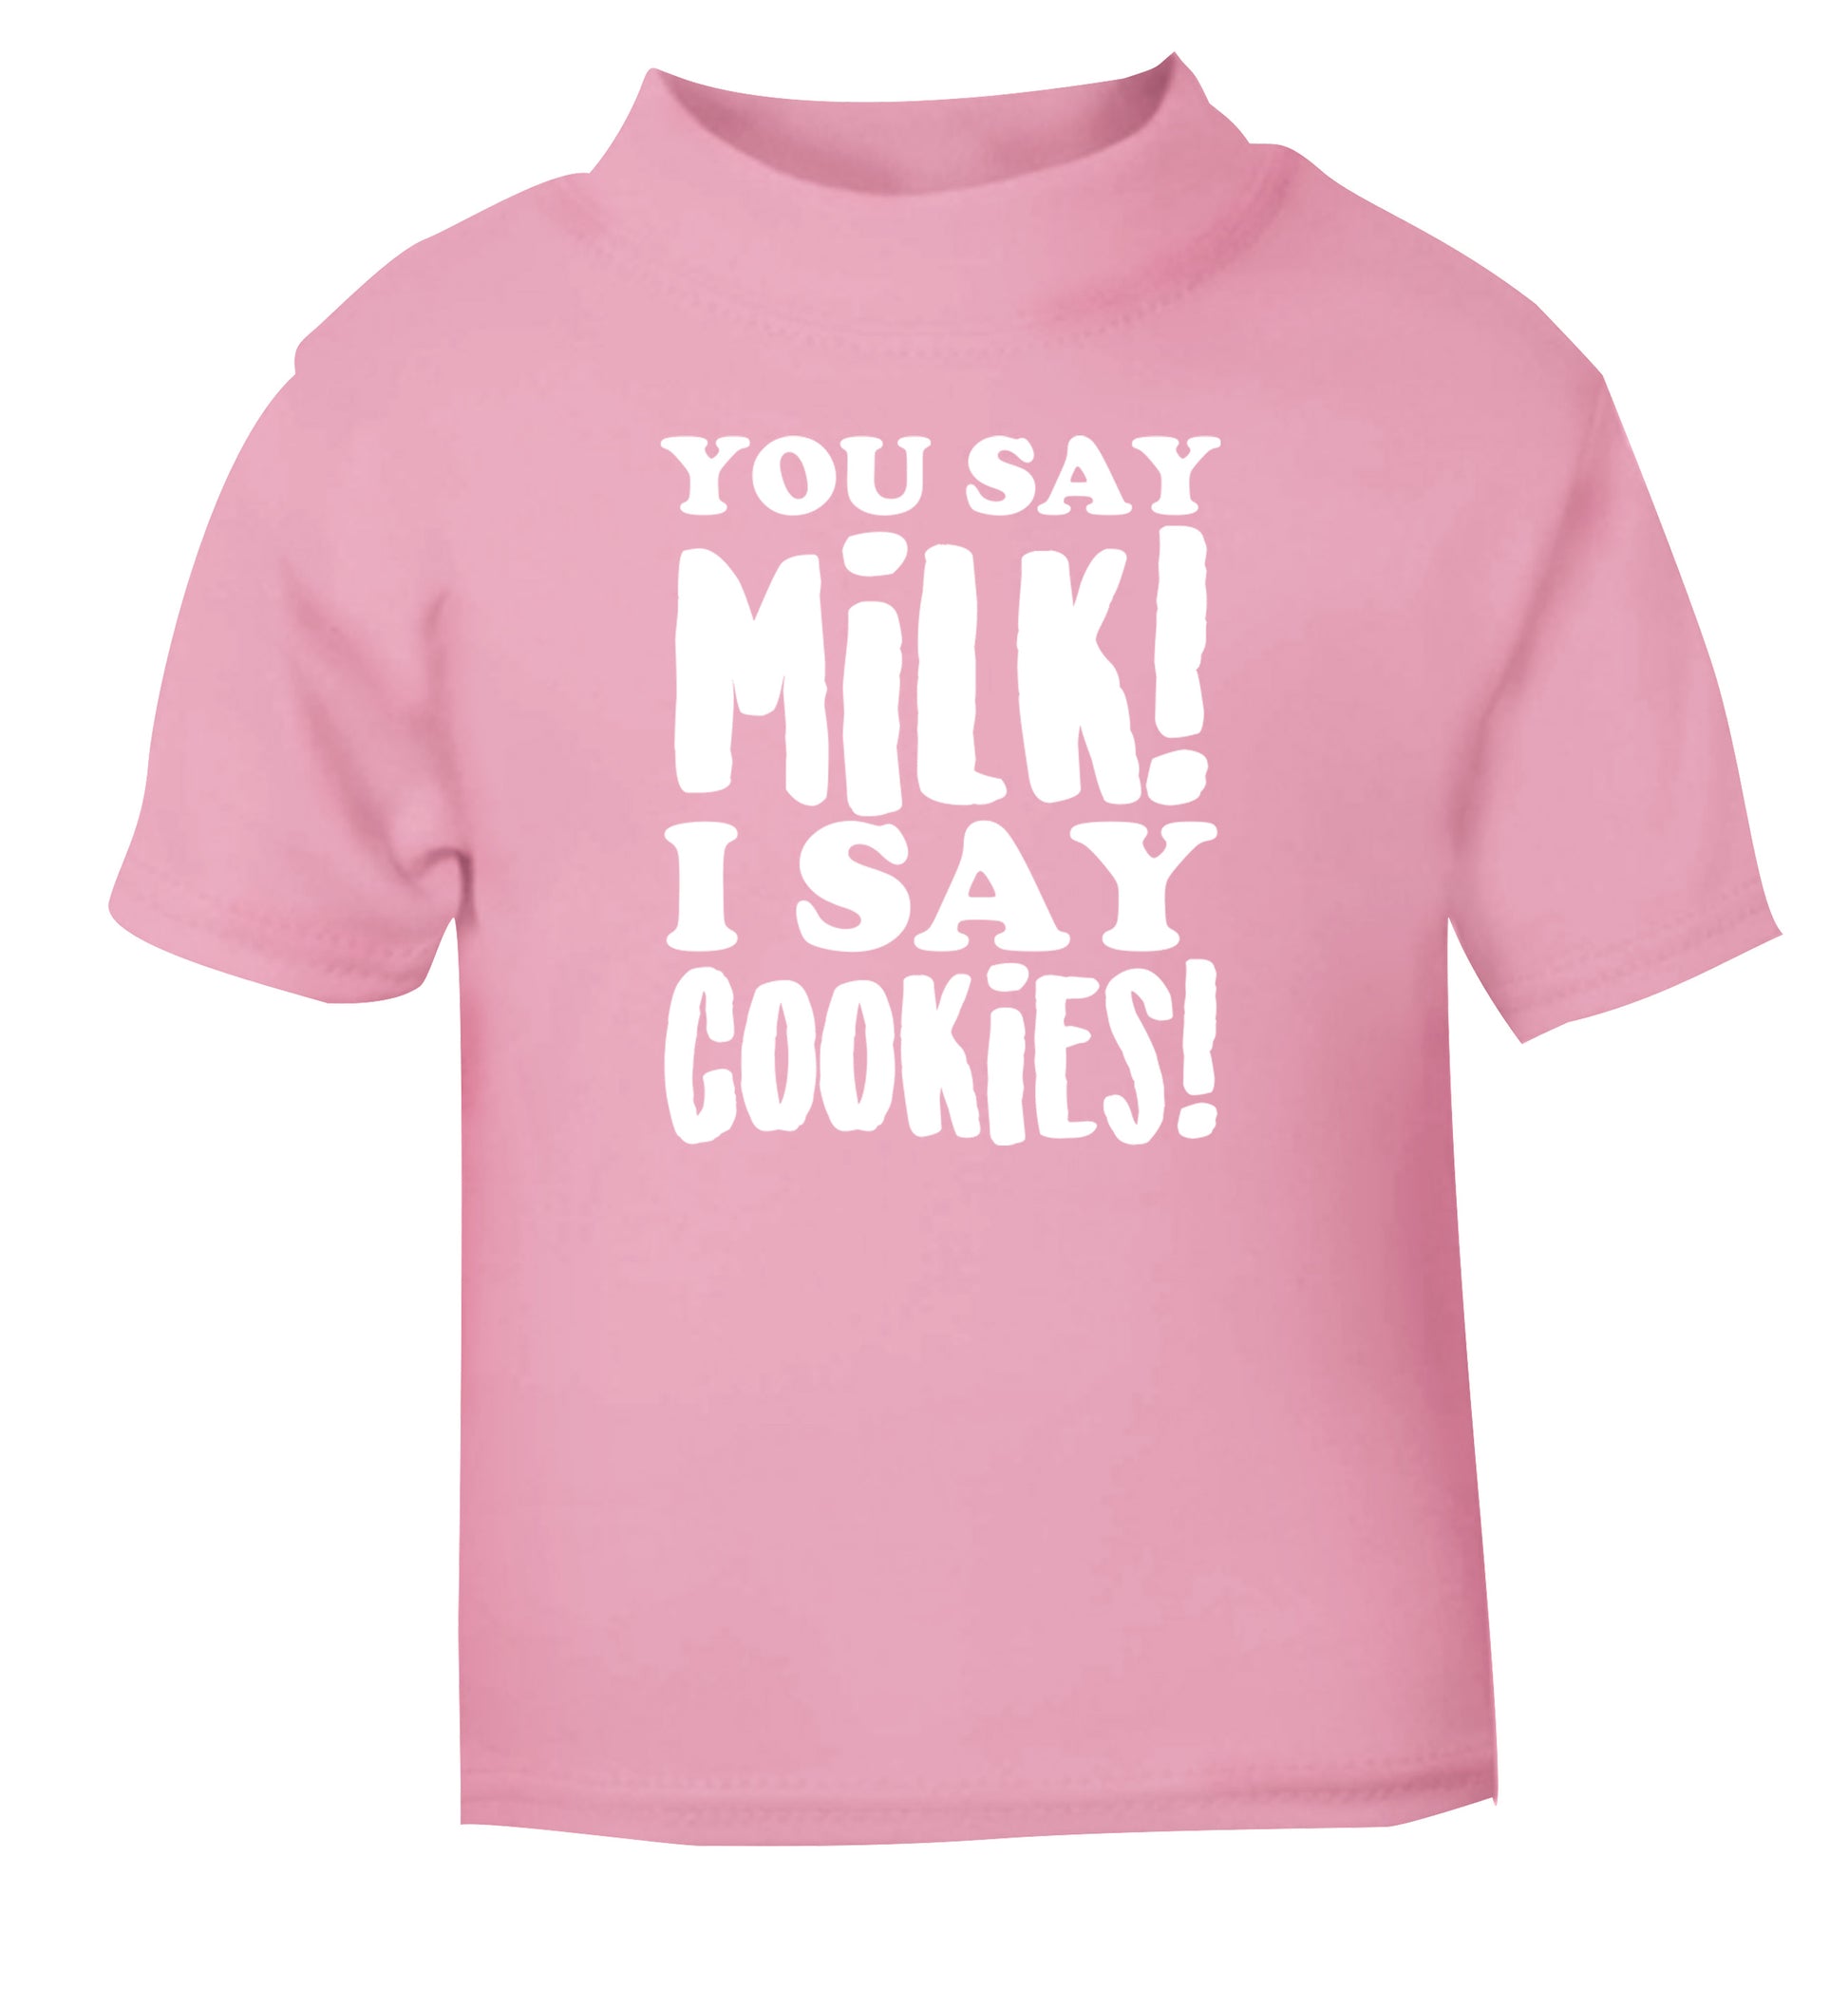 You say milk I say cookies! light pink Baby Toddler Tshirt 2 Years